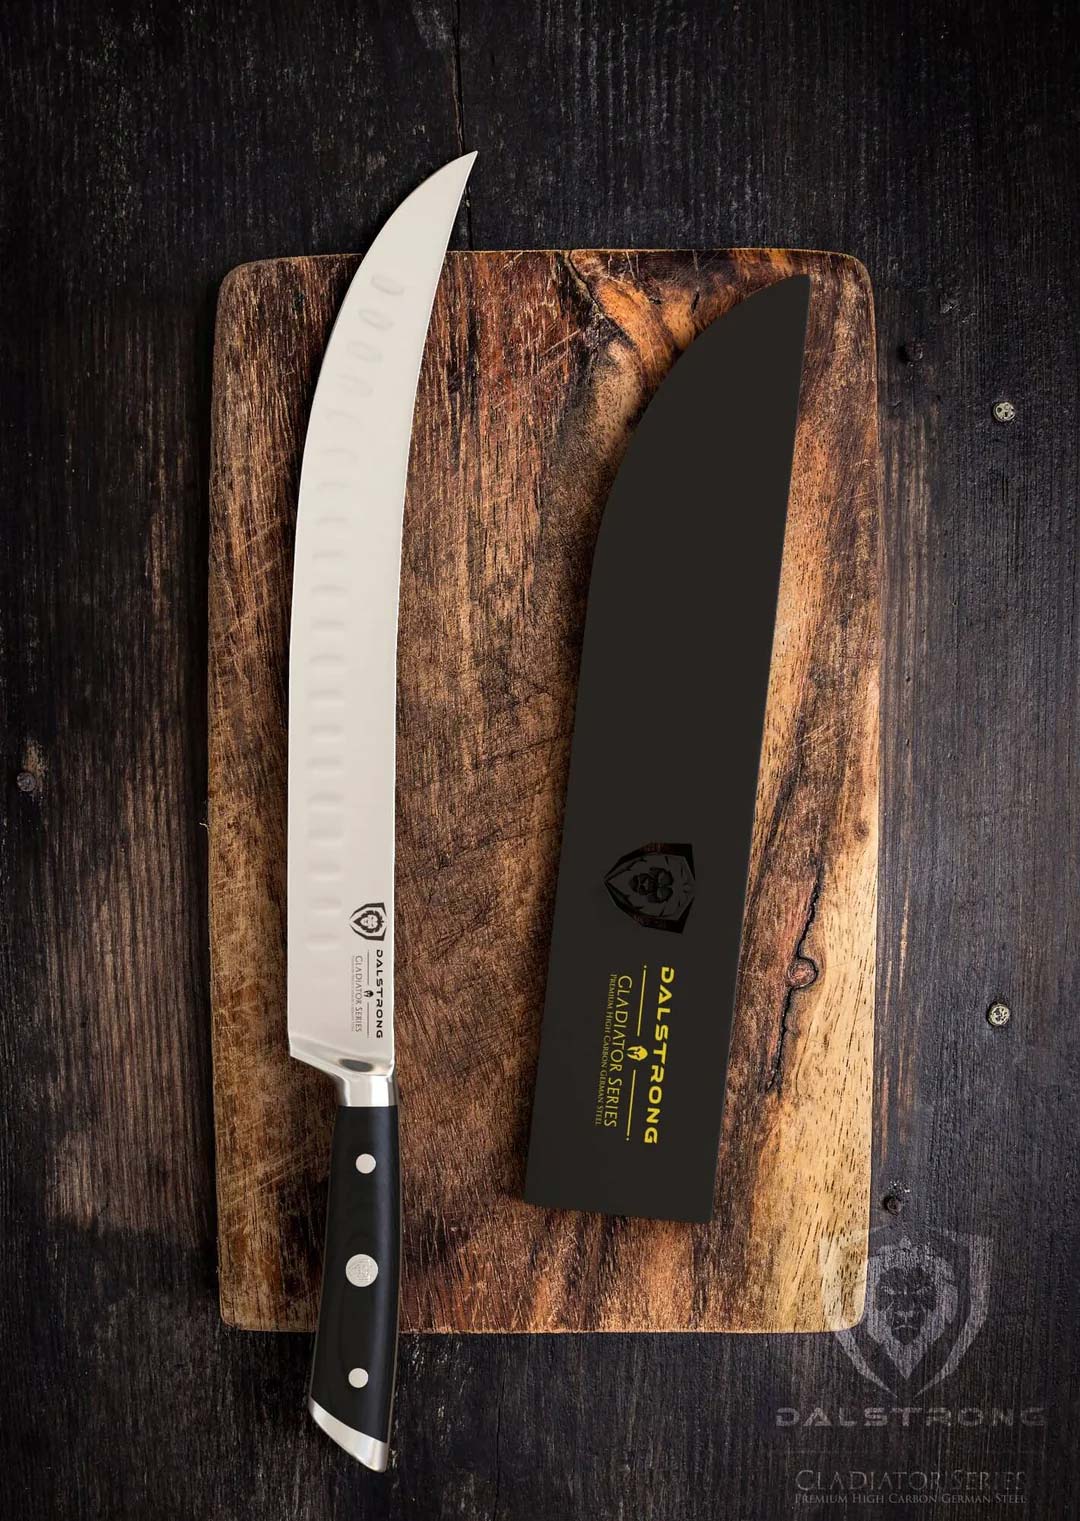 DALSTRONG Giant Butcher's Breaking Knife - Gladiator Series - The